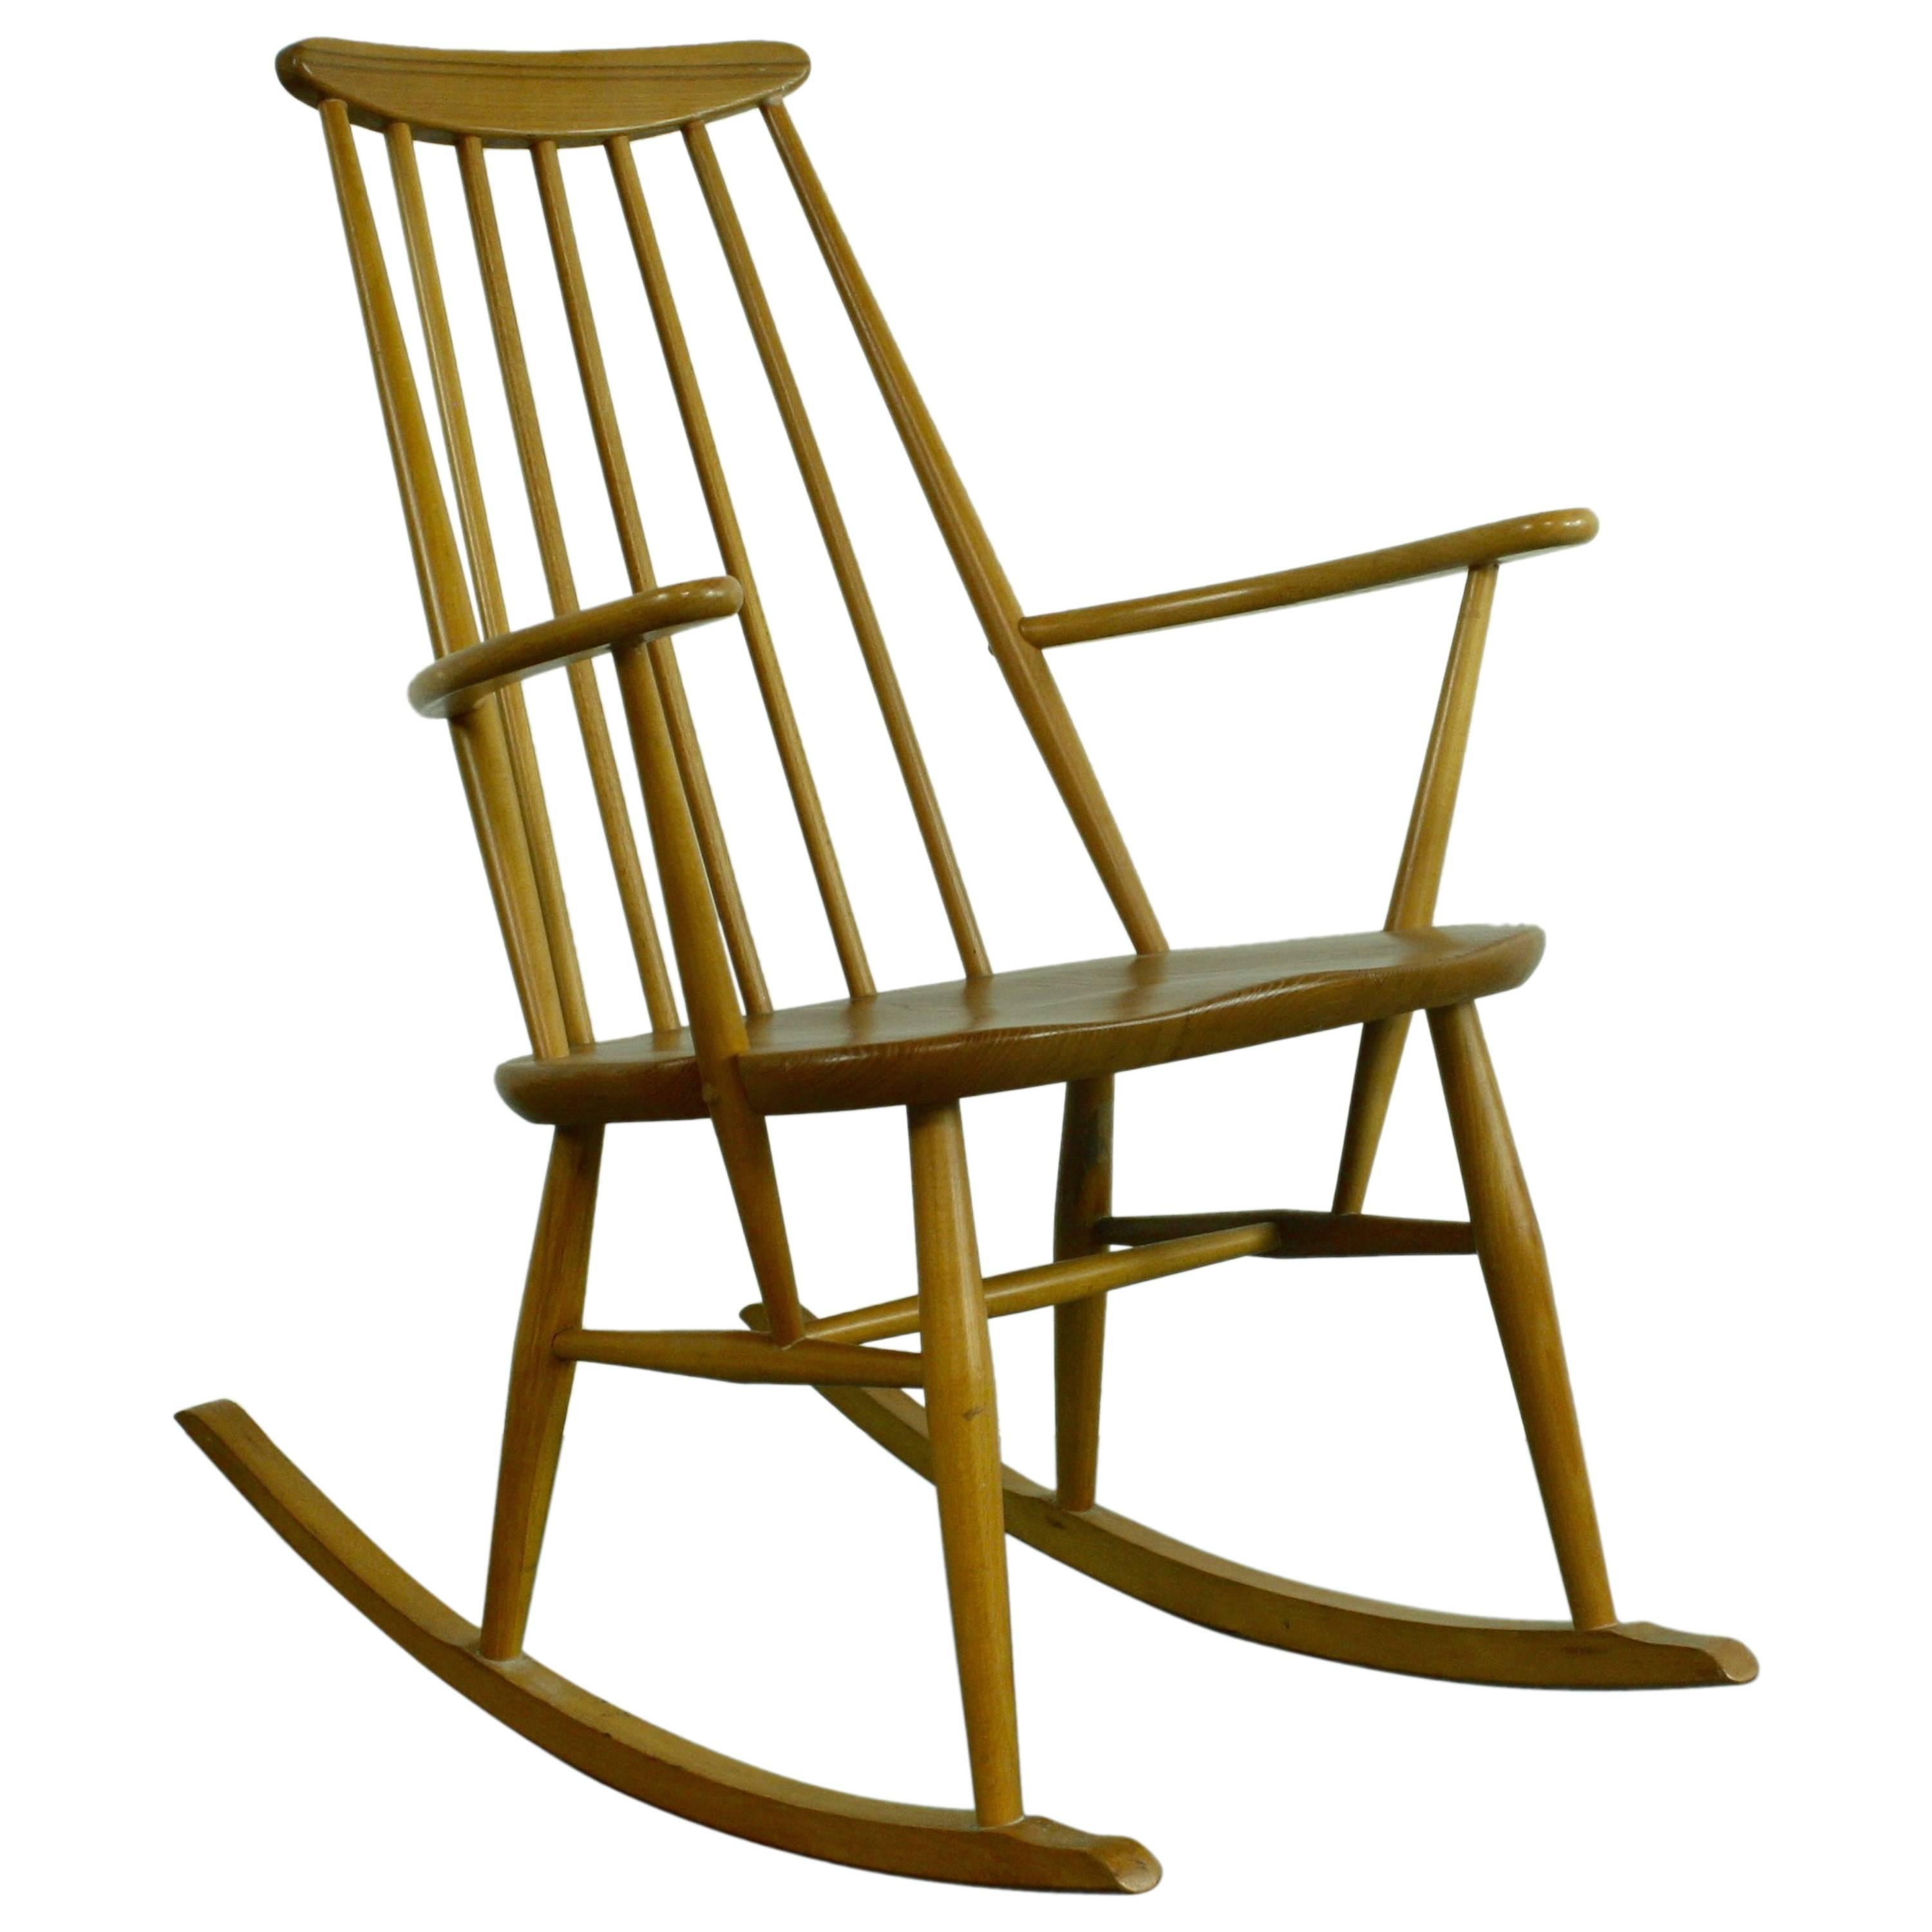 Vintage Midcentury Ercol Rocking Chair For Sale